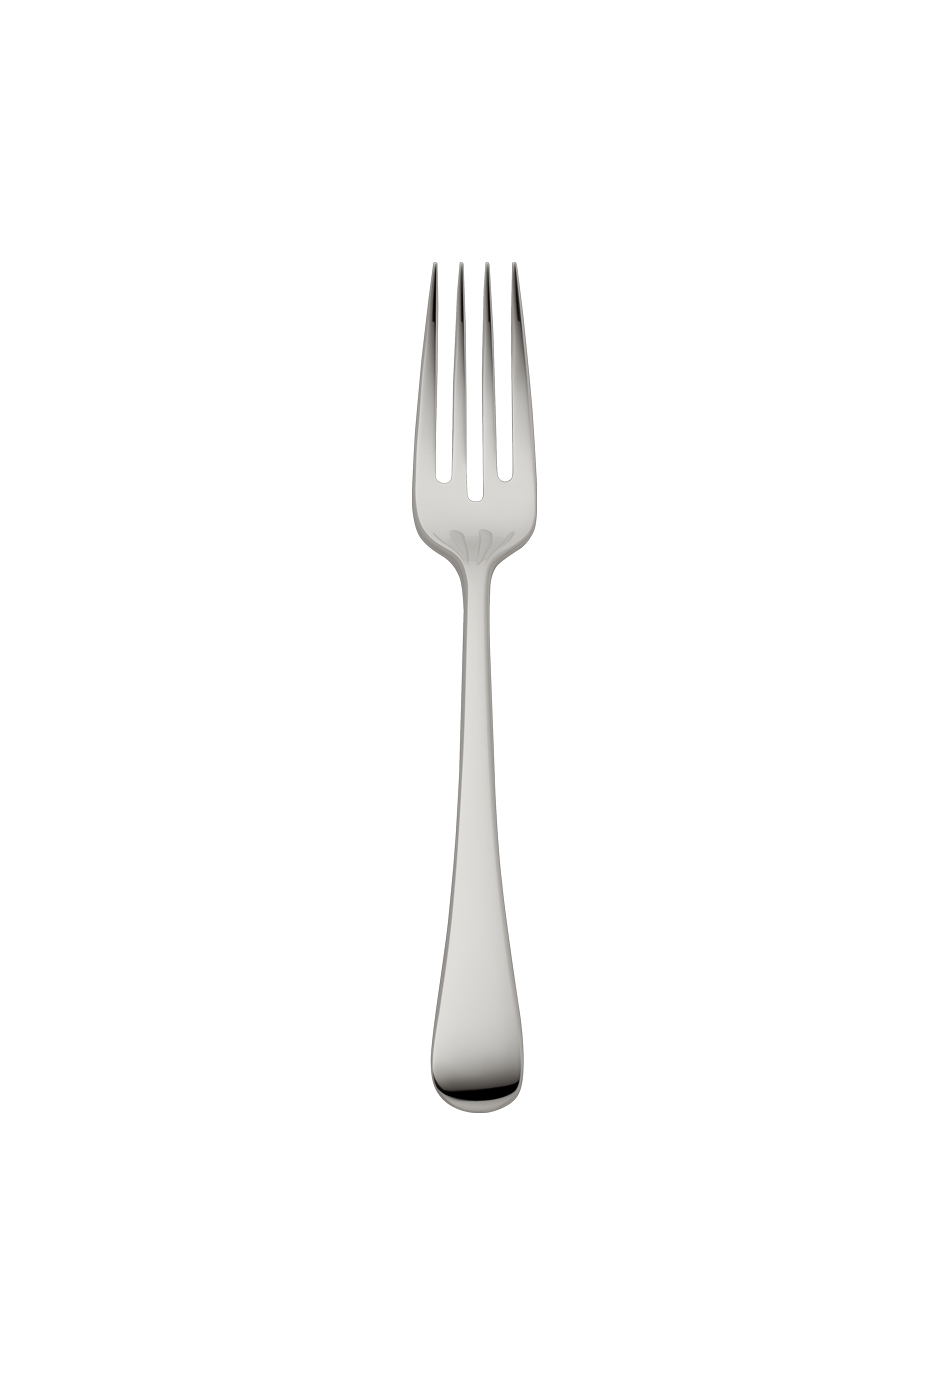 Como Fish Fork (18/8 stainless steel)